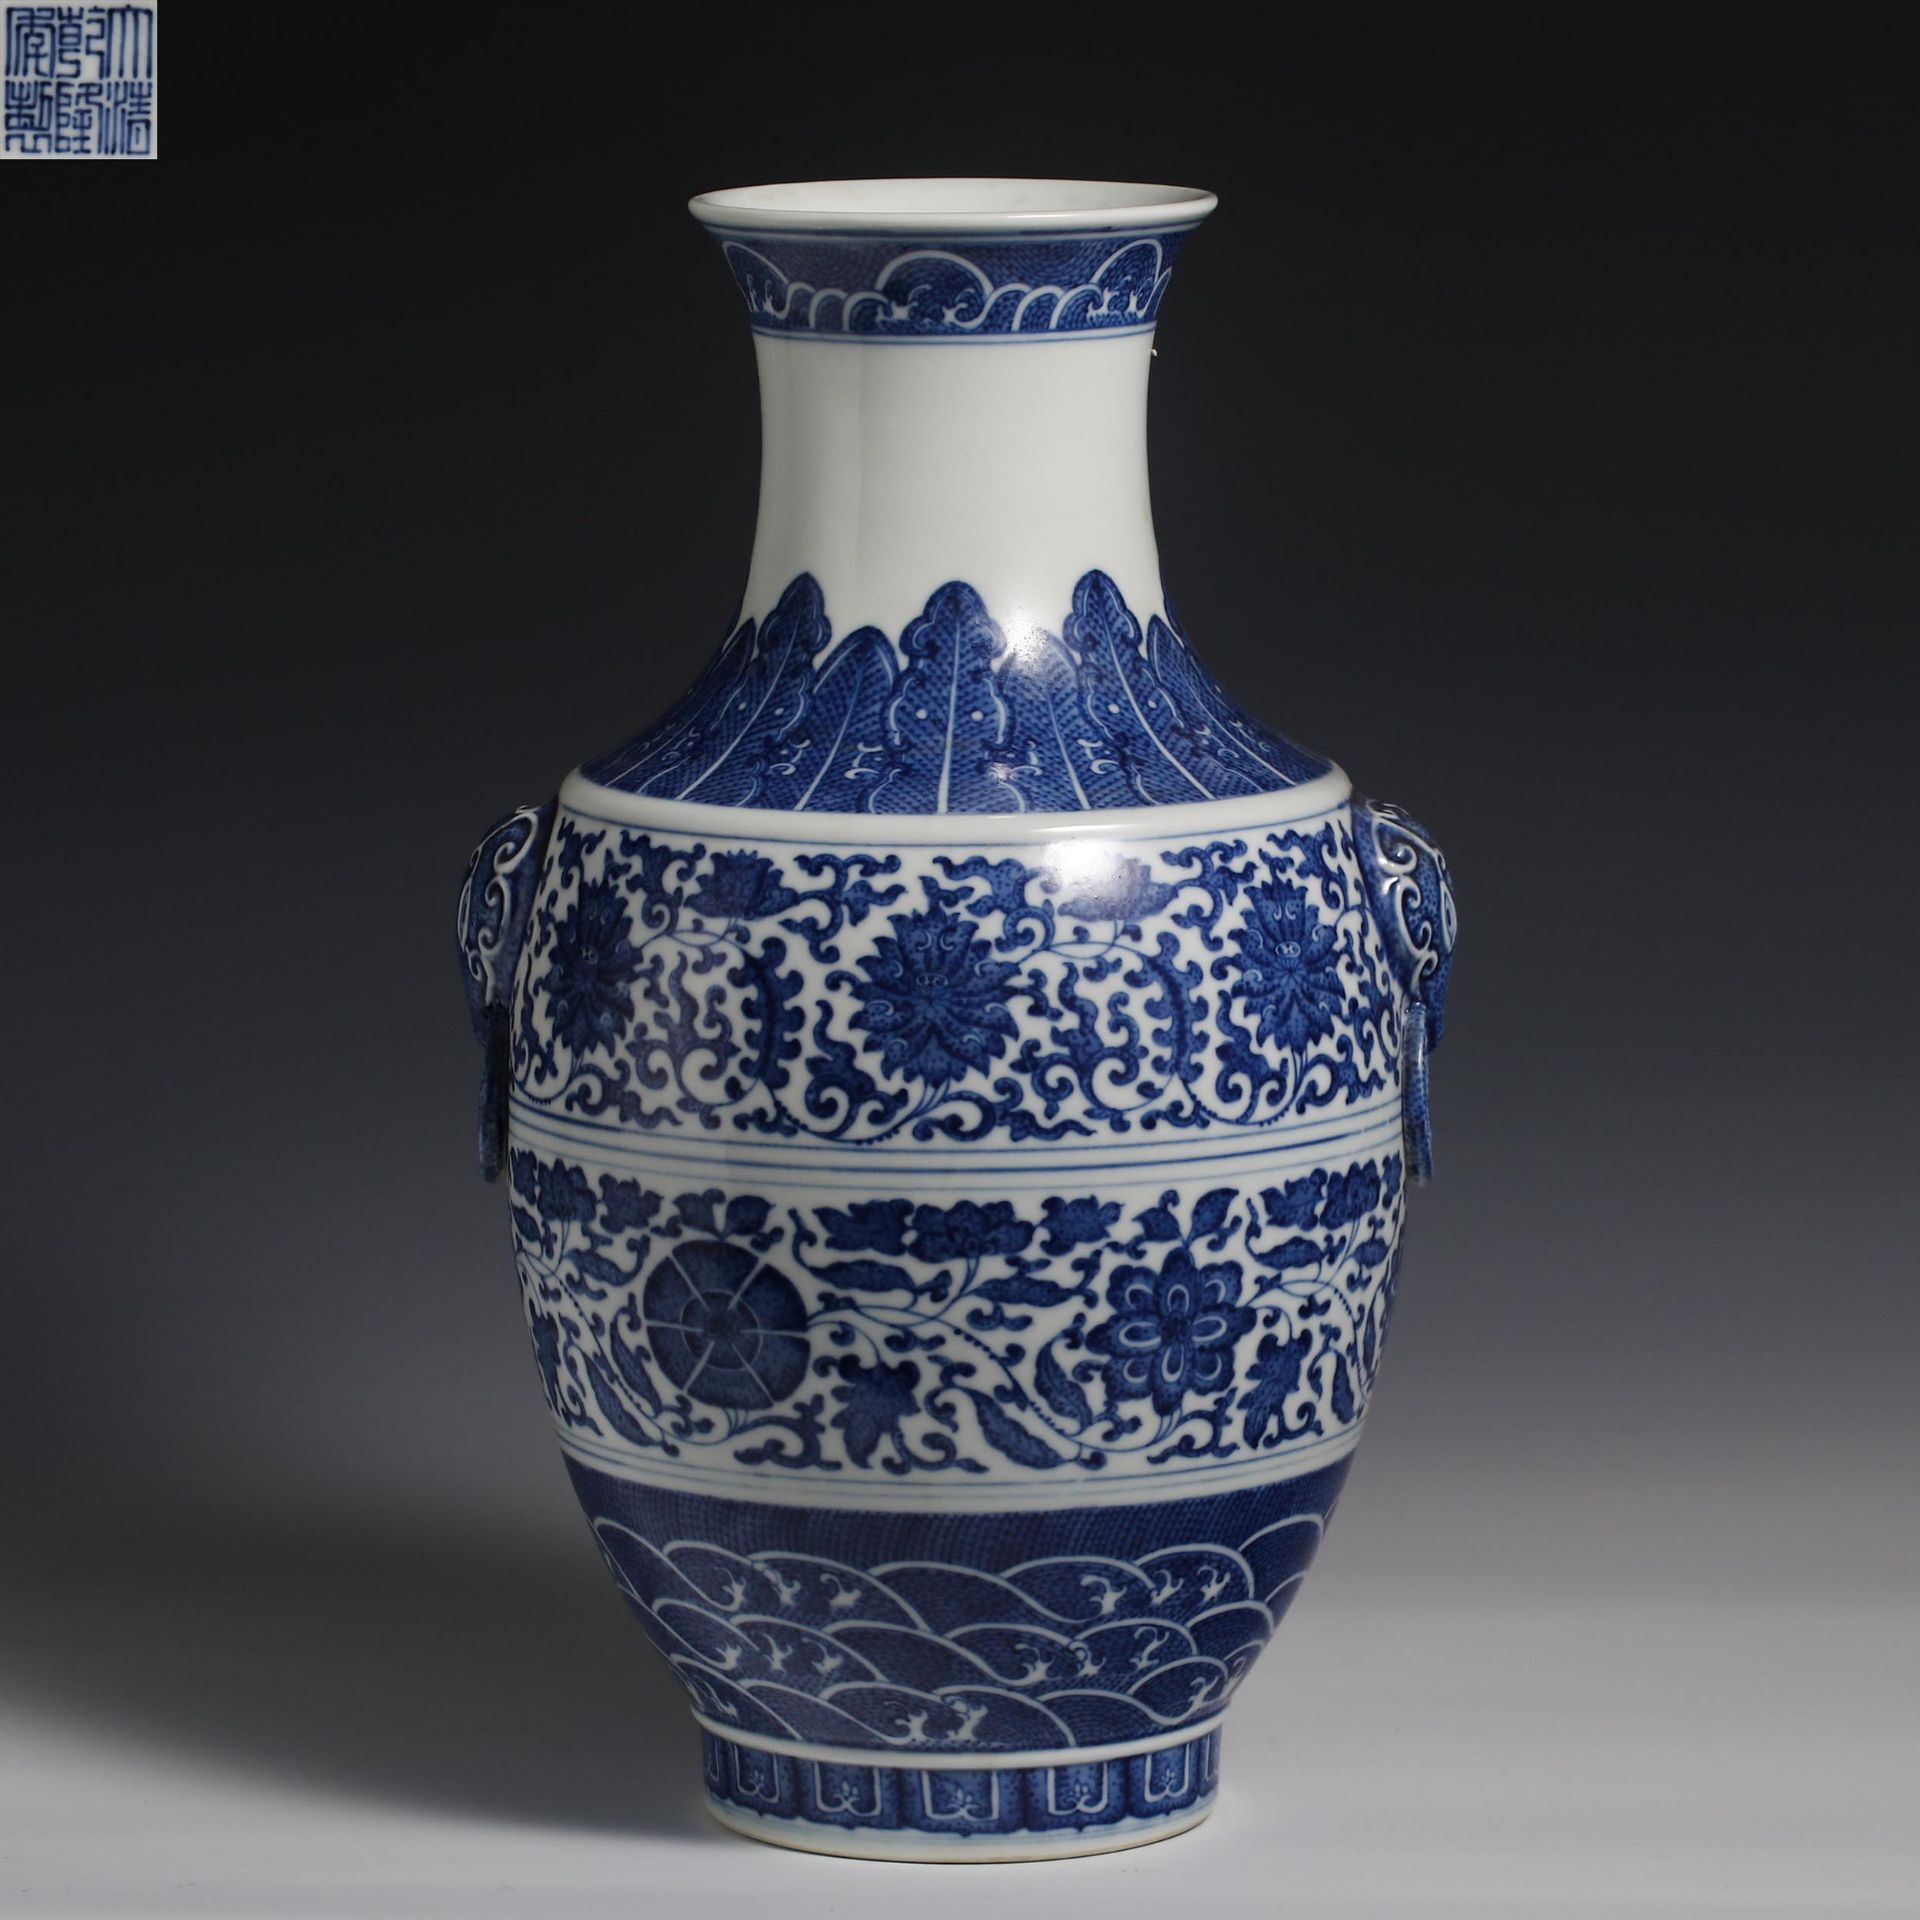 The Blue and White Zun in the 18th Century